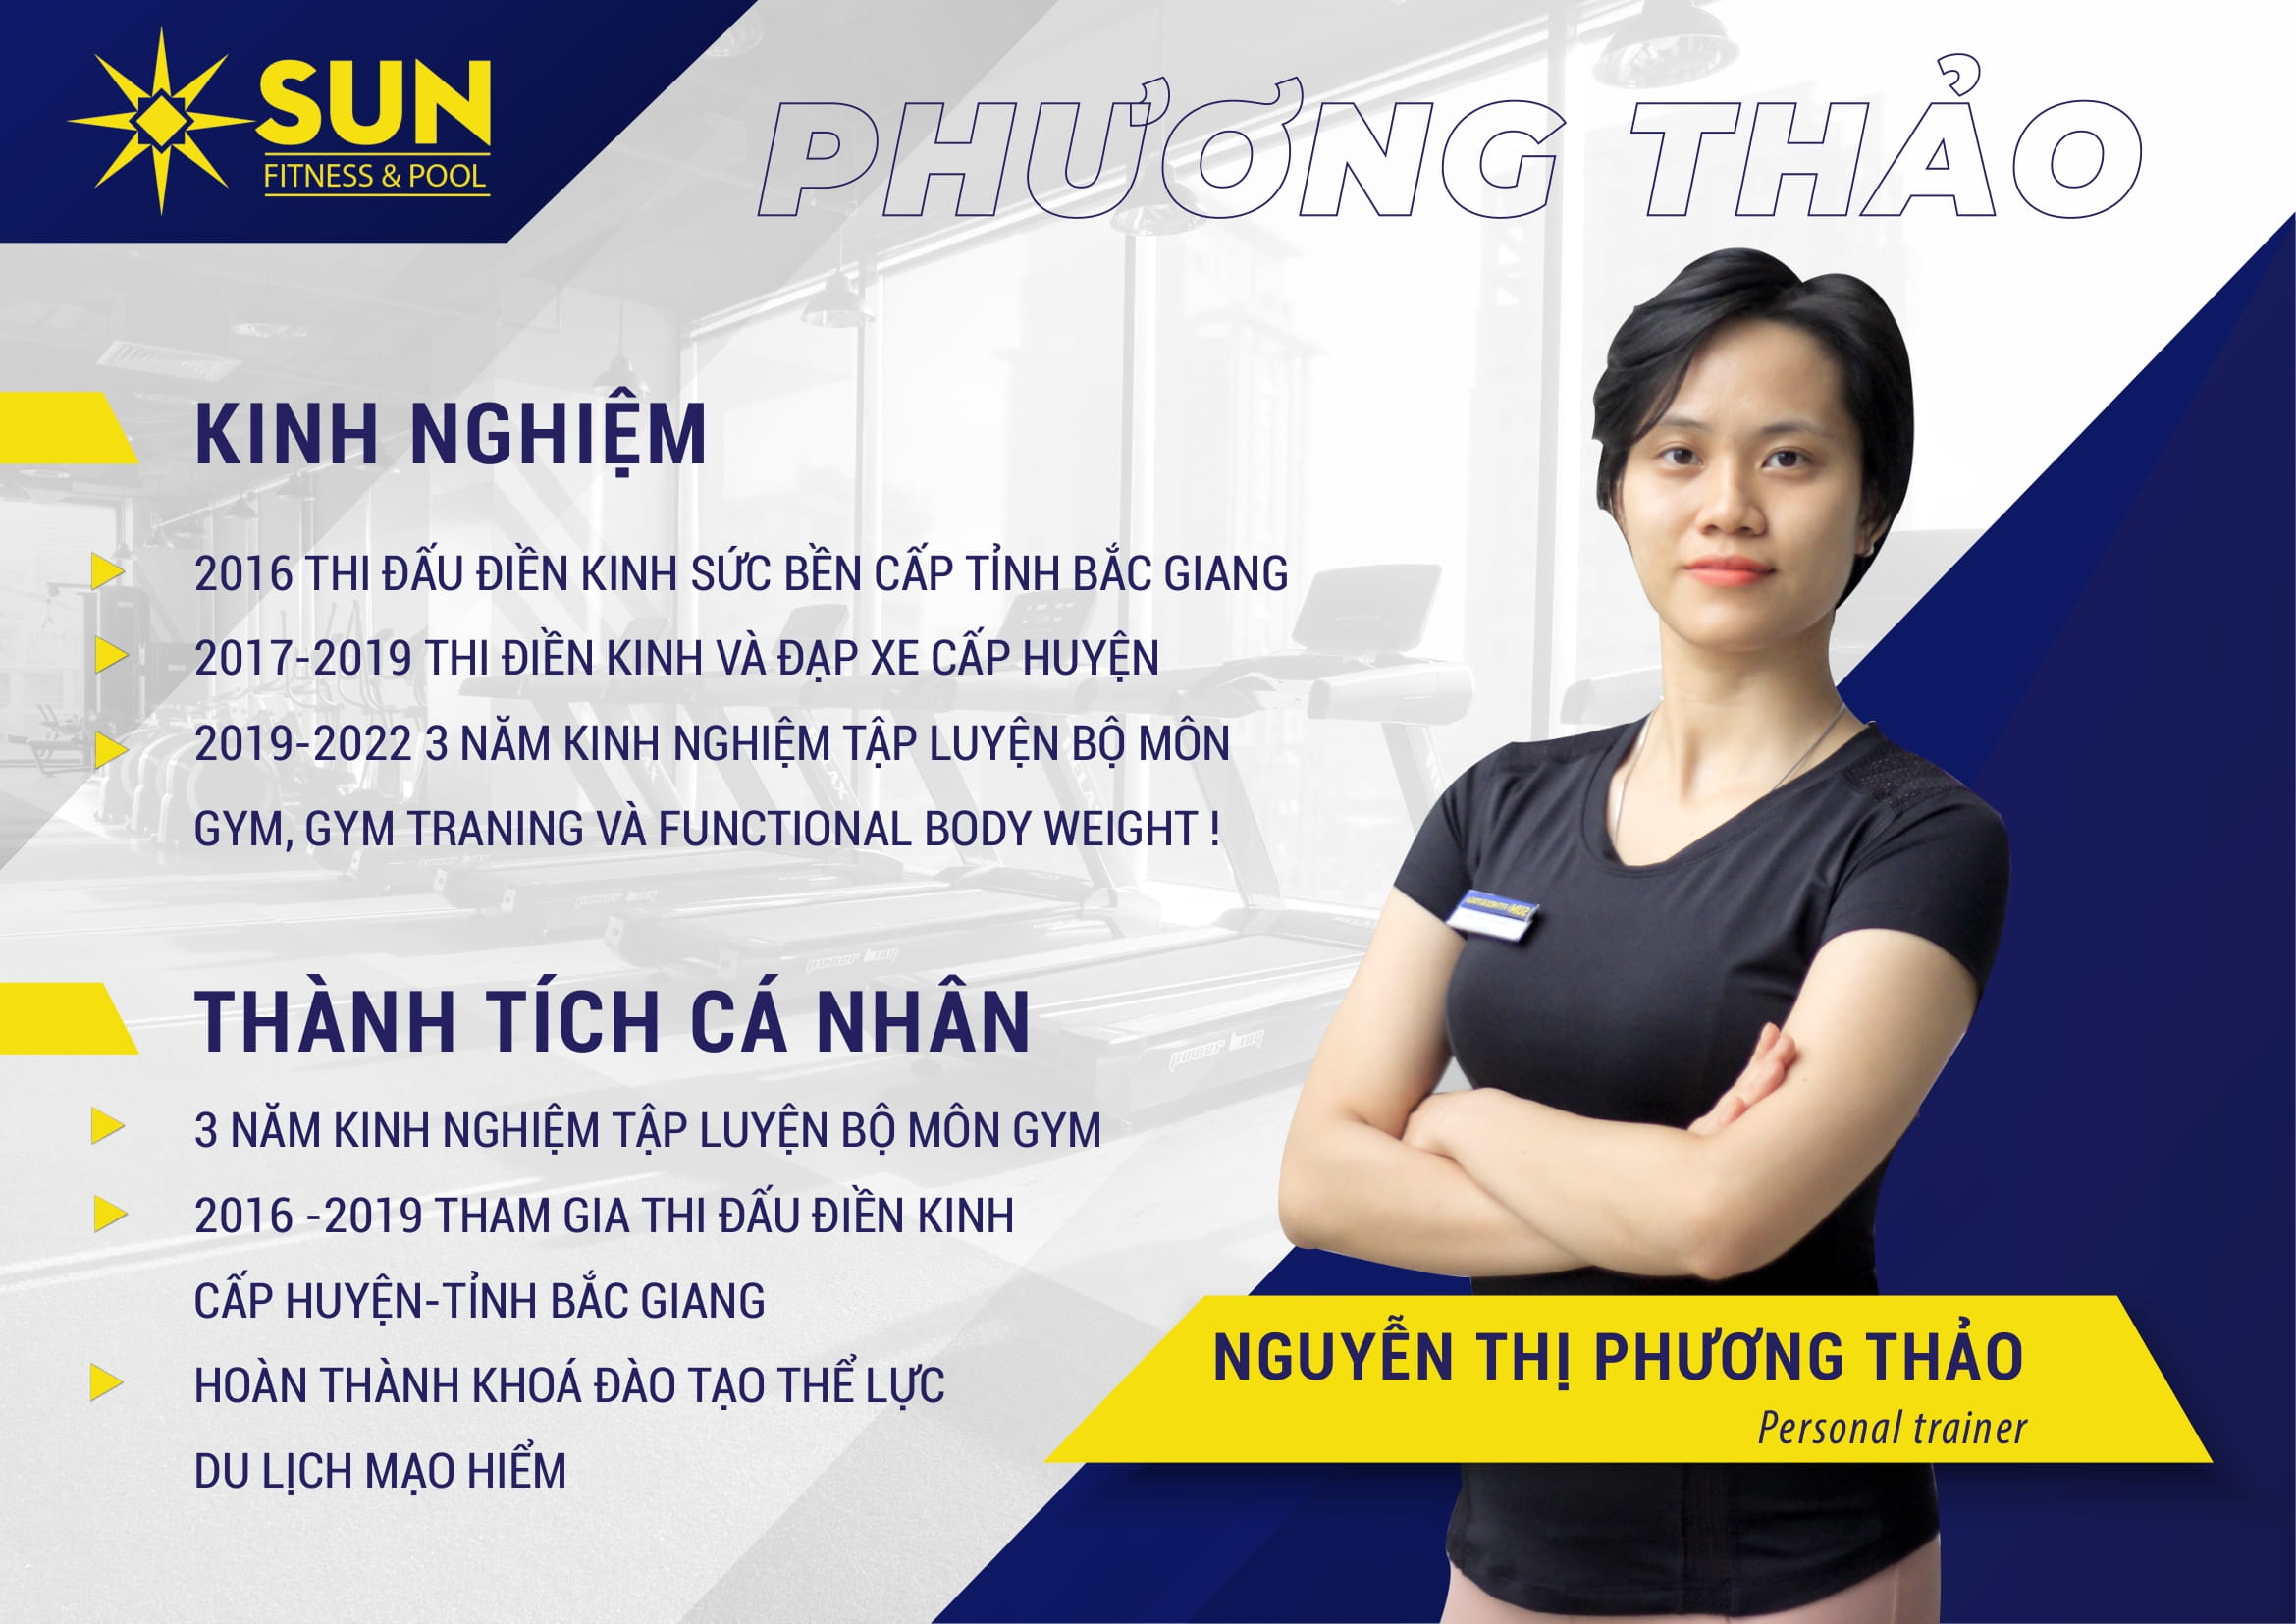 Personal-Trainer-Phuong-thao